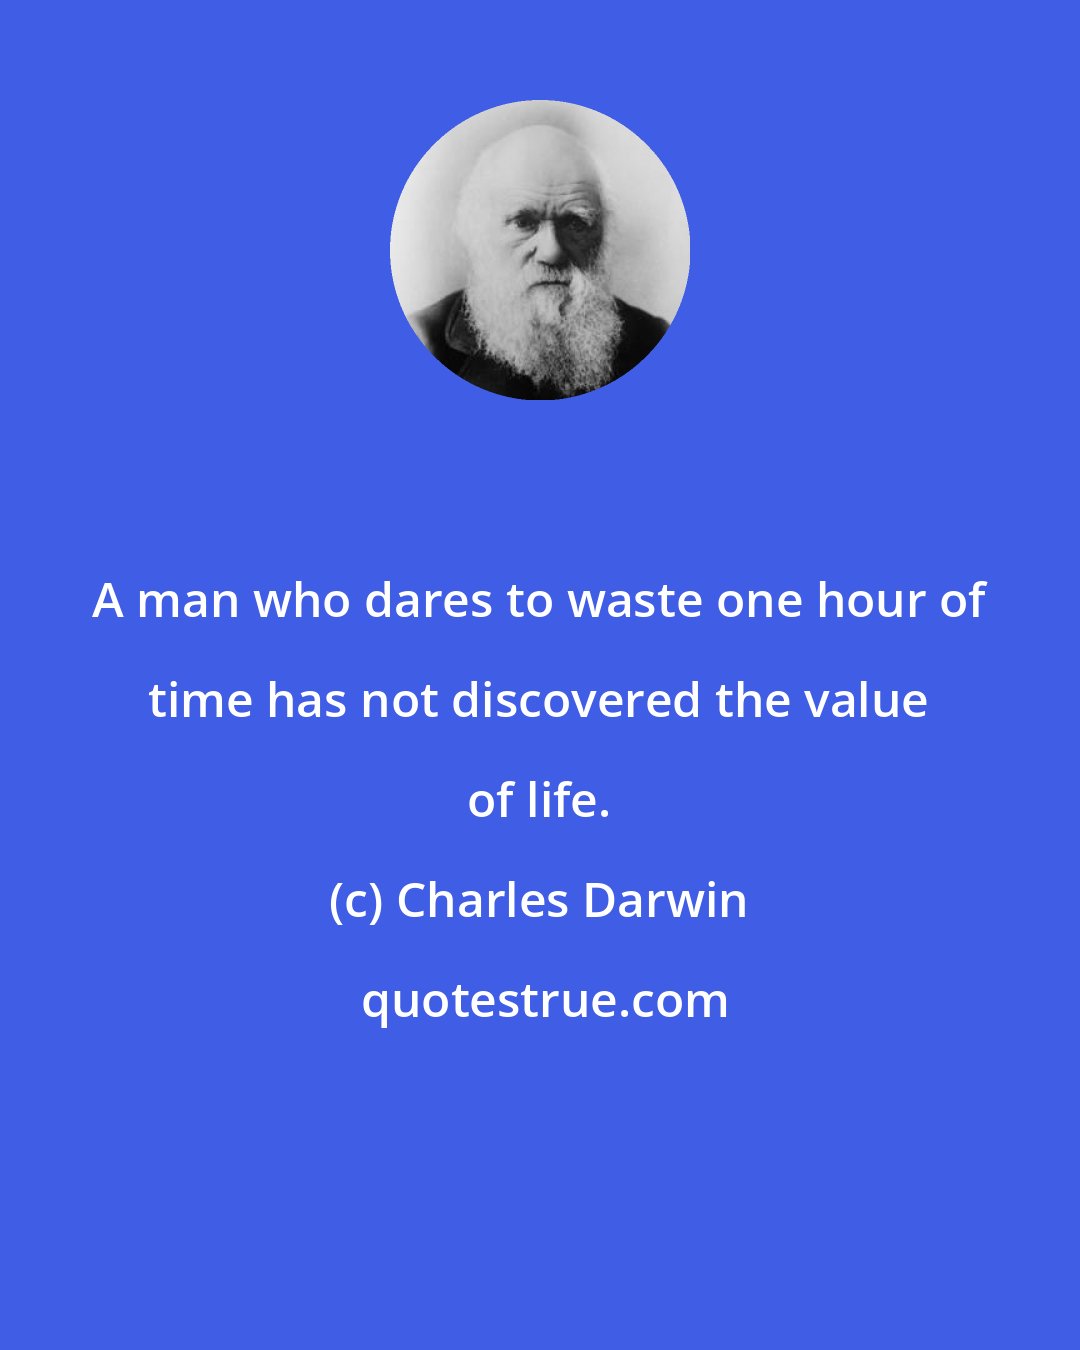 Charles Darwin: A man who dares to waste one hour of time has not discovered the value of life.